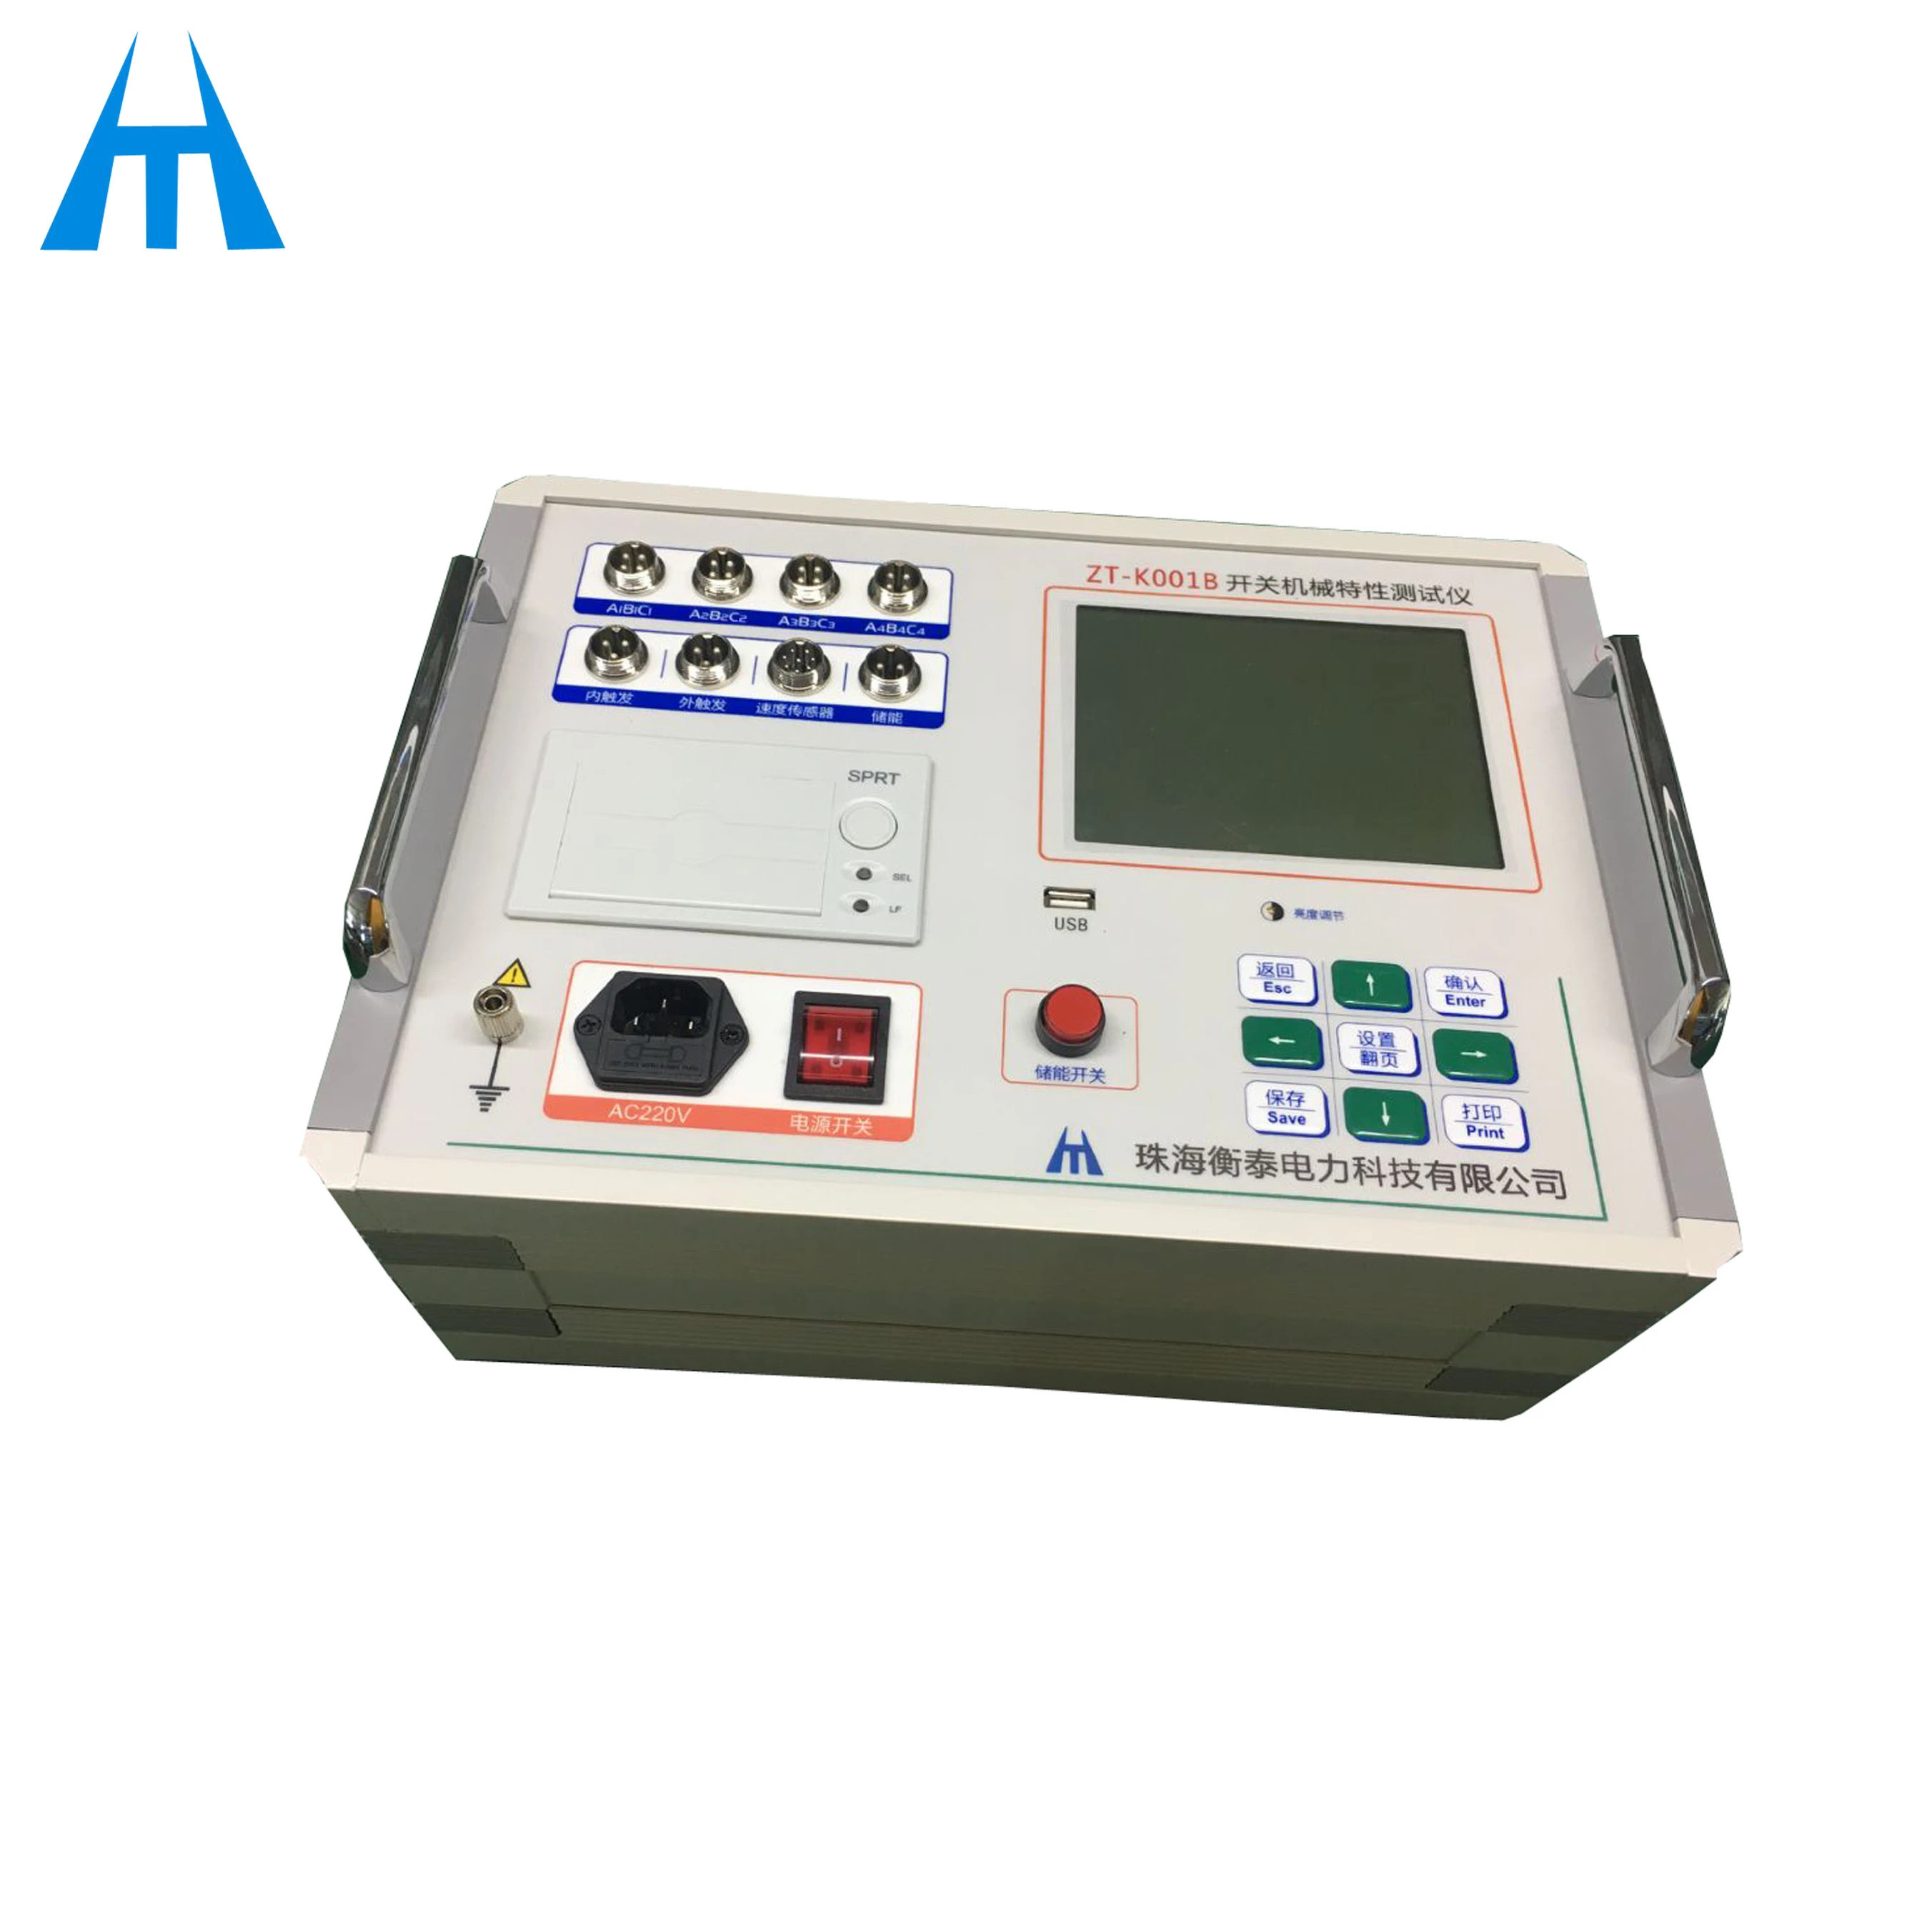 ZT-K001B Instrument for Dynamic Characteristics of Circuit Breakers High Voltage Switch Tester